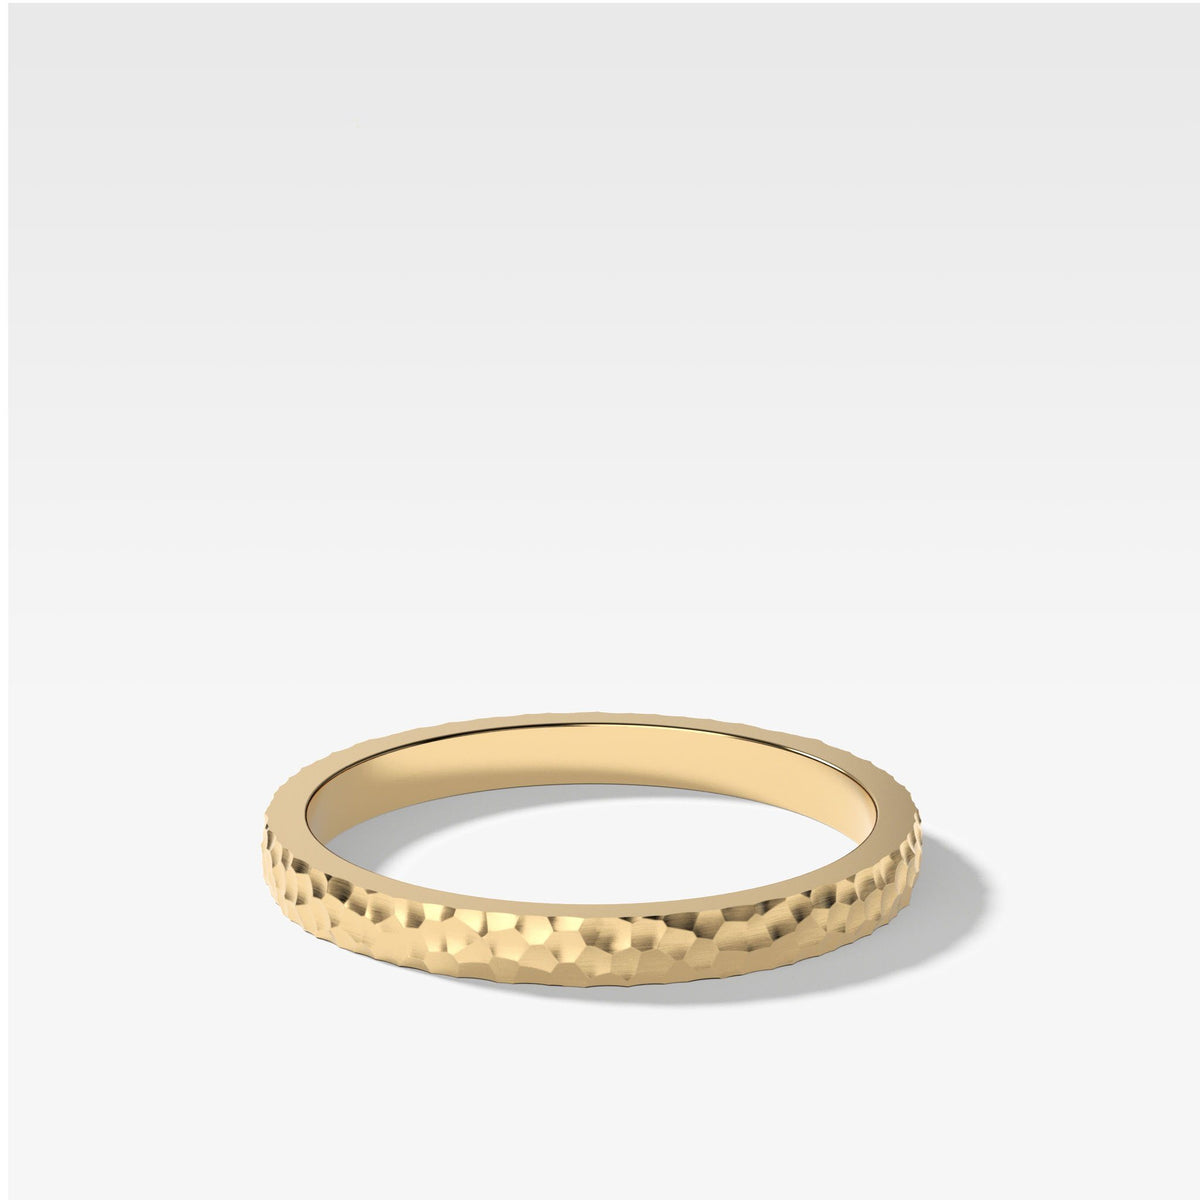 Hammered Band by Good Stone in Yellow Gold